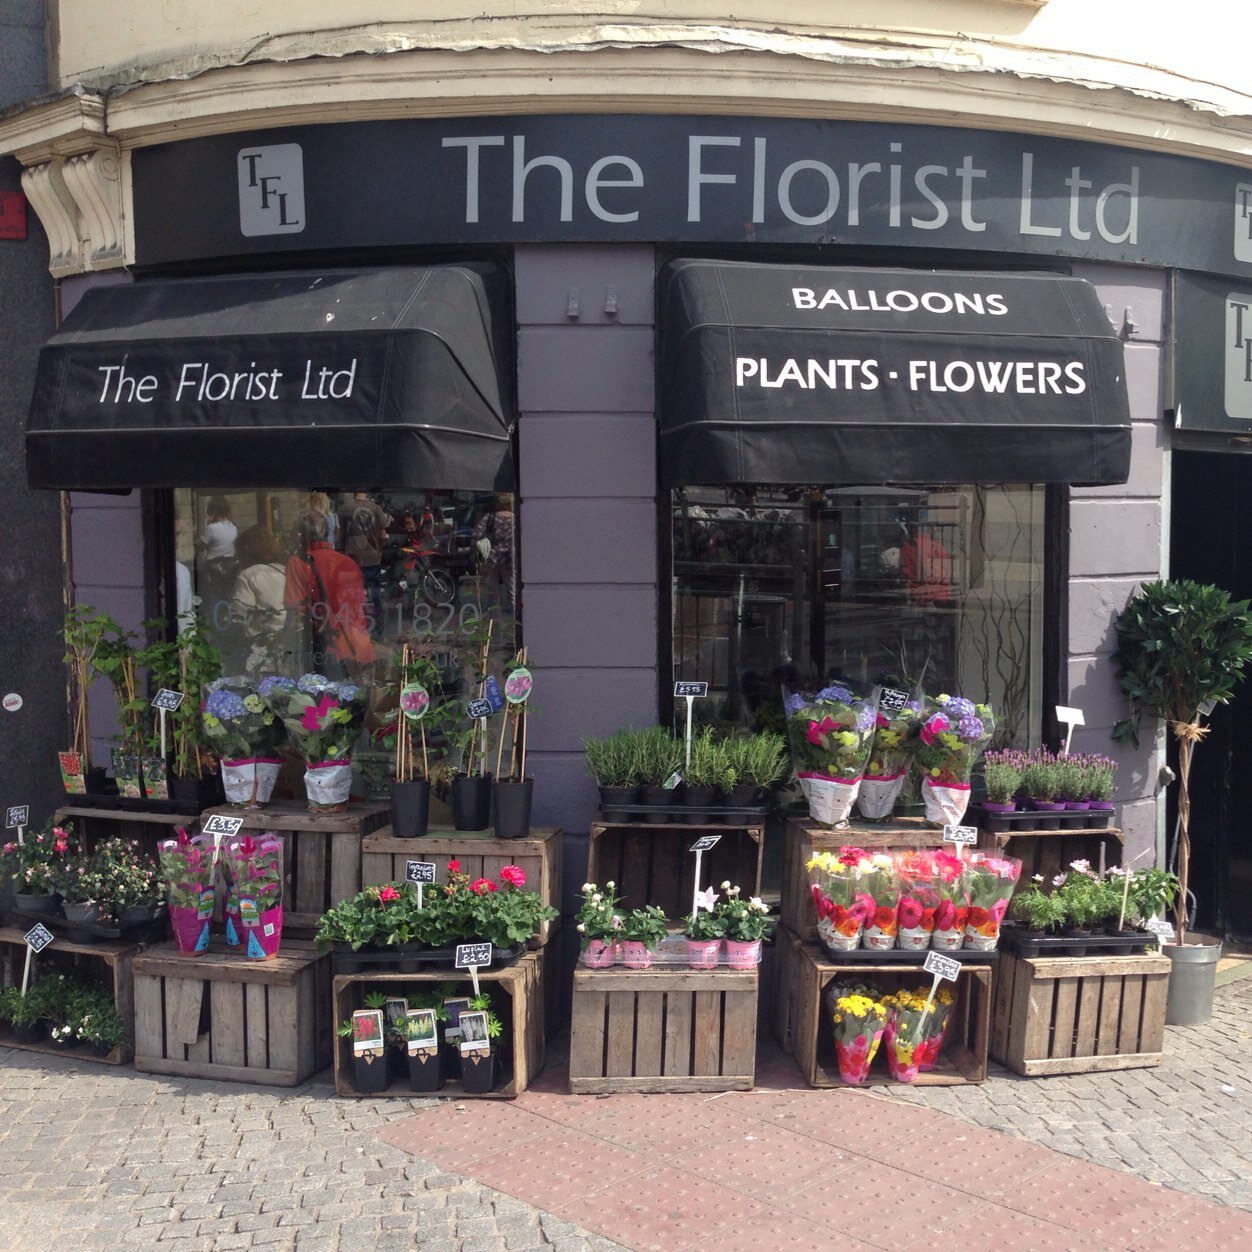 Say it with flowers from TFL........ Bristol City Centre florist. We deliver and our florists will always provide you with the most beautiful arrangements.